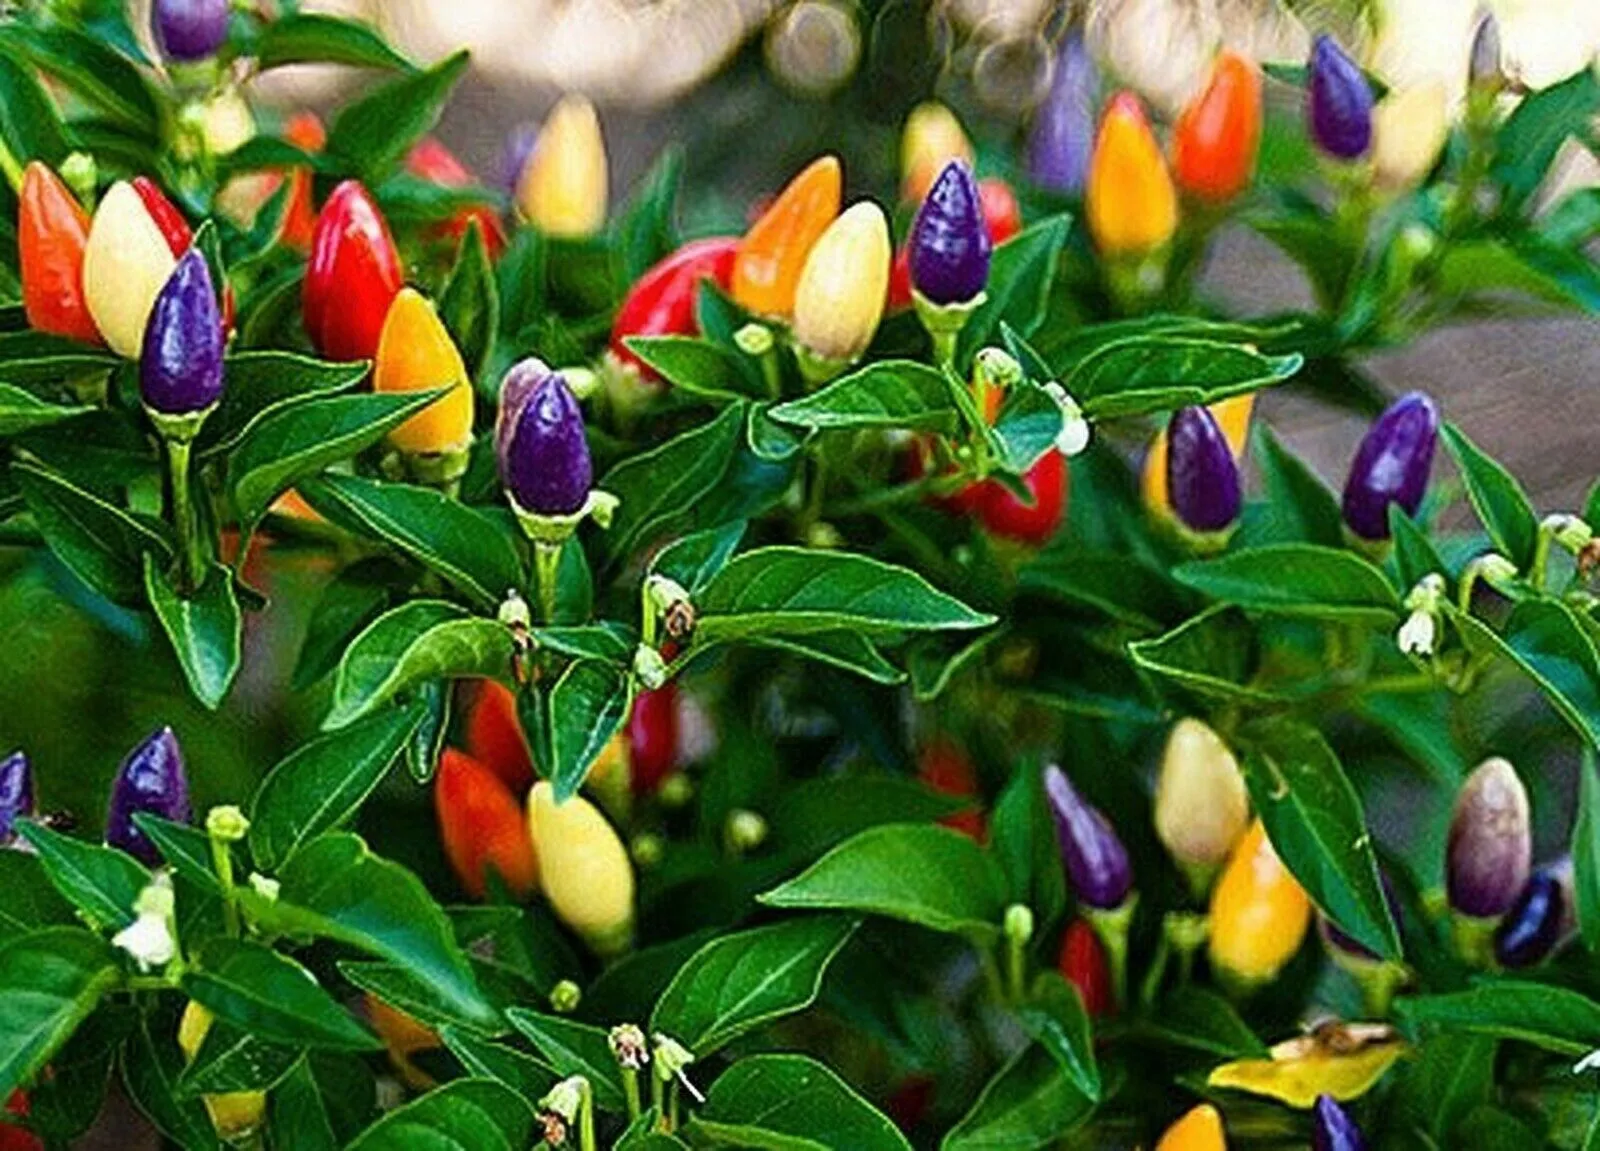 Bolivian Rainbow Chilli Seeds 30 Seeds Ornamental Chili Peppers Spicy Chili - $10.44